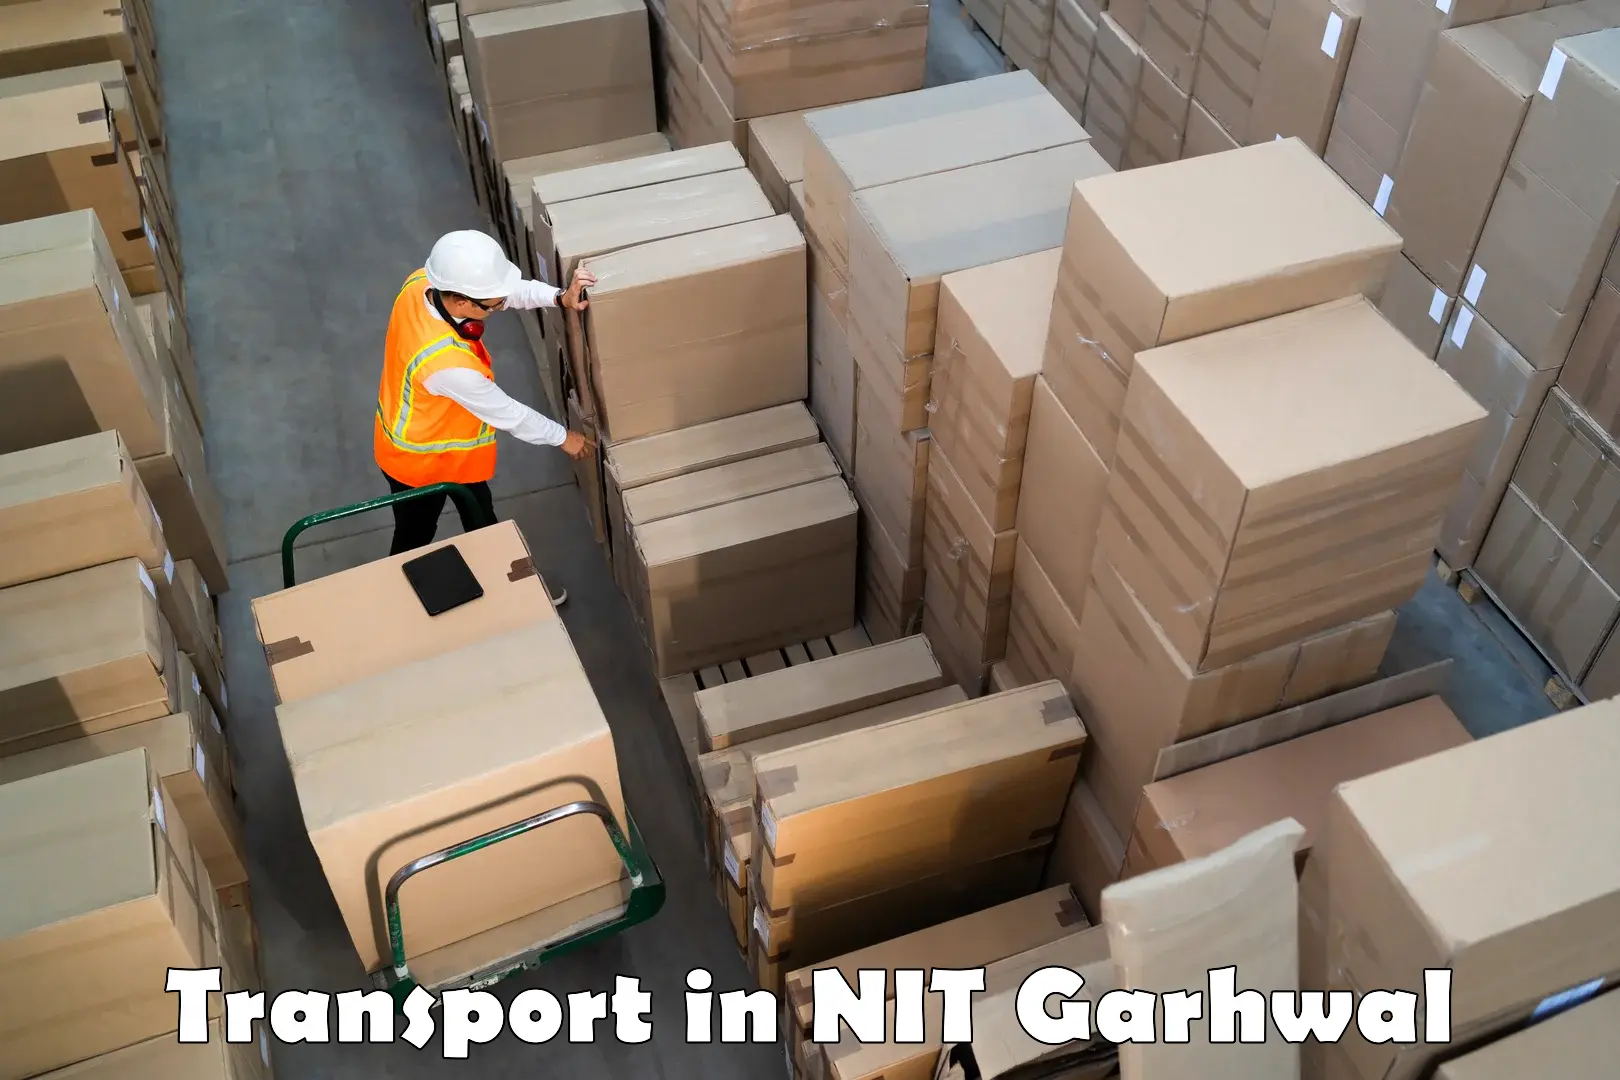 Nearby transport service in NIT Garhwal